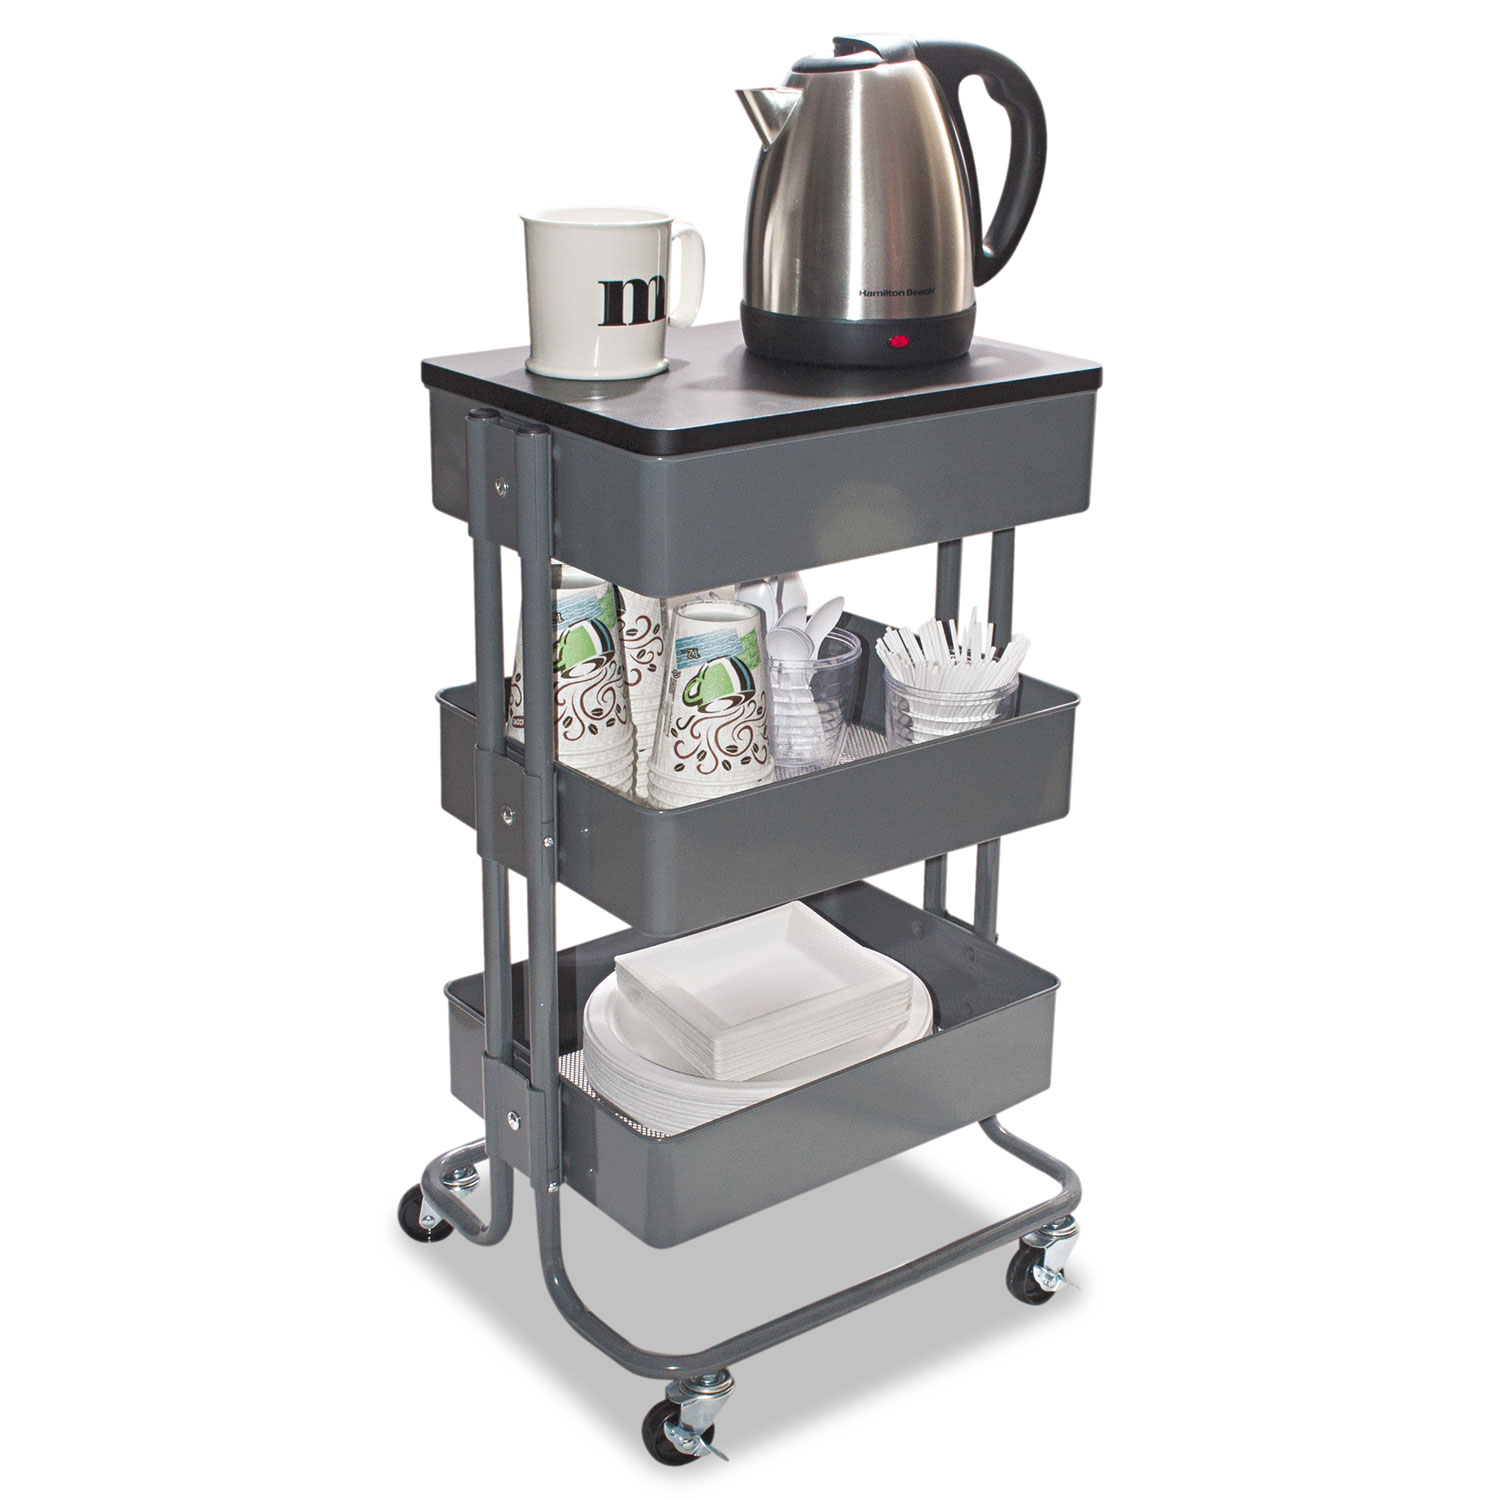 Multi-Use Storage Cart/Stand-Up Workstation, 13.9w x 16.9d x 18.5-39.5h, Gray